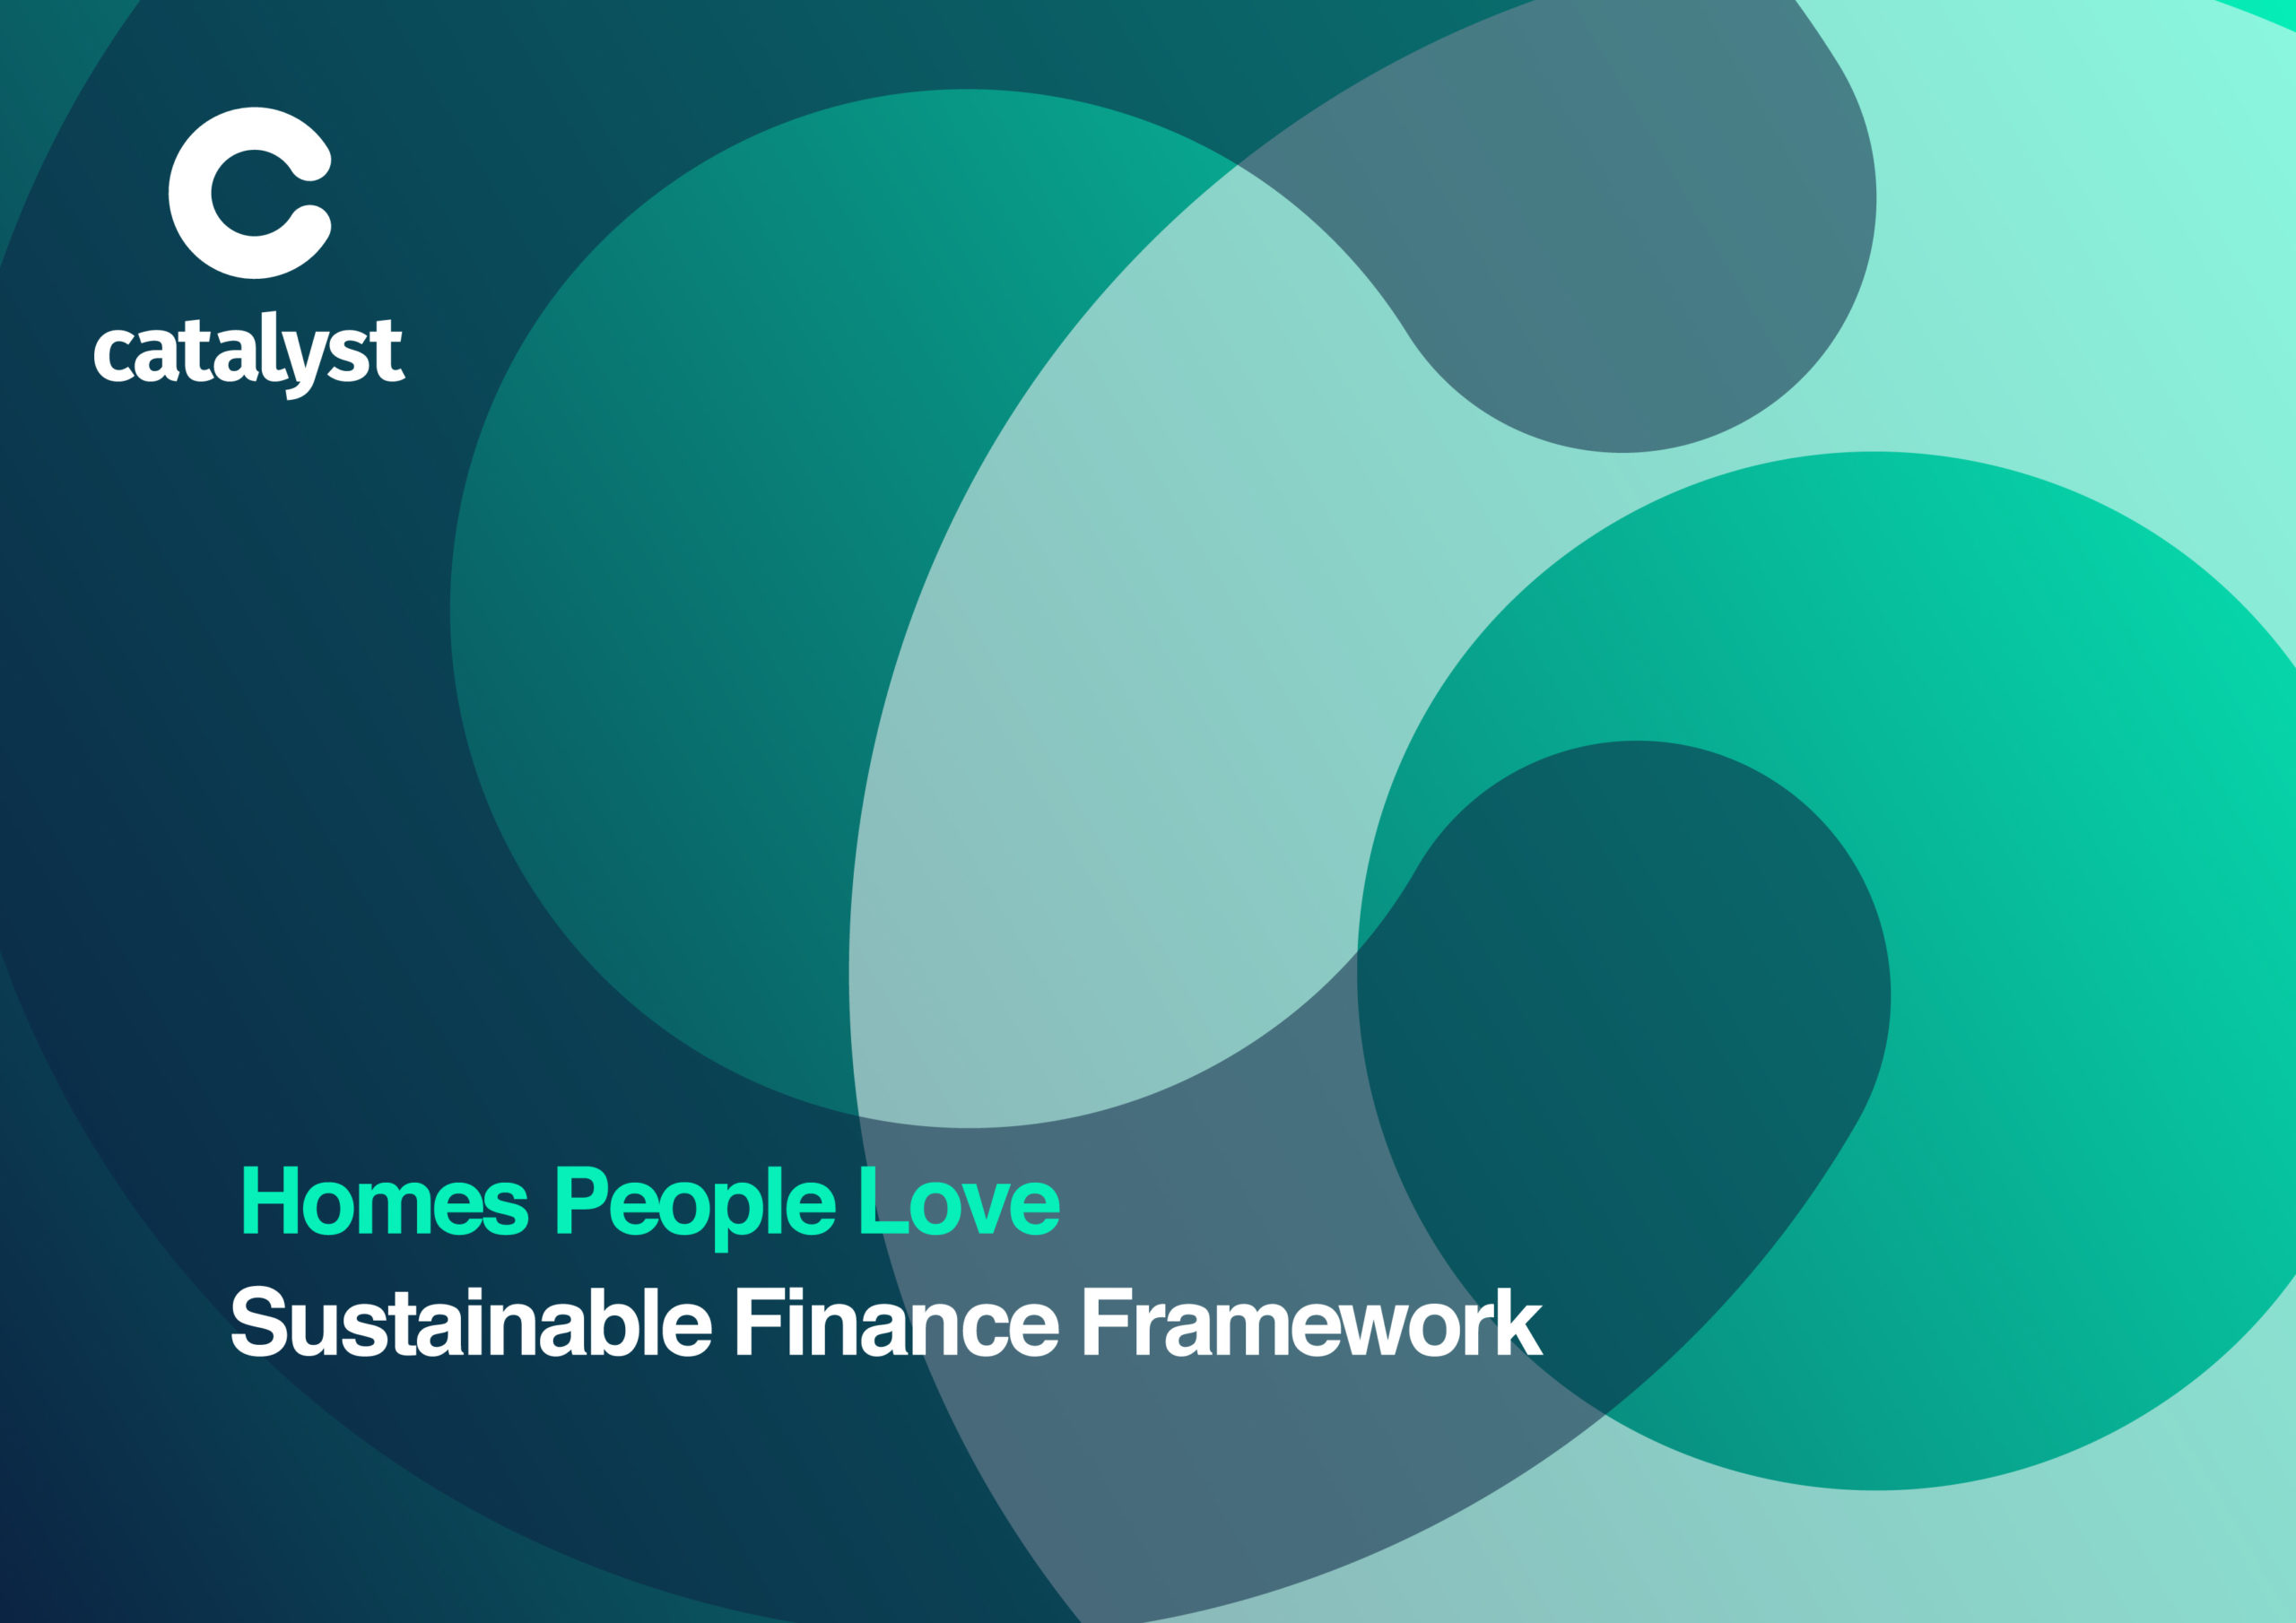 Catalyst launches new Sustainable Finance Framework